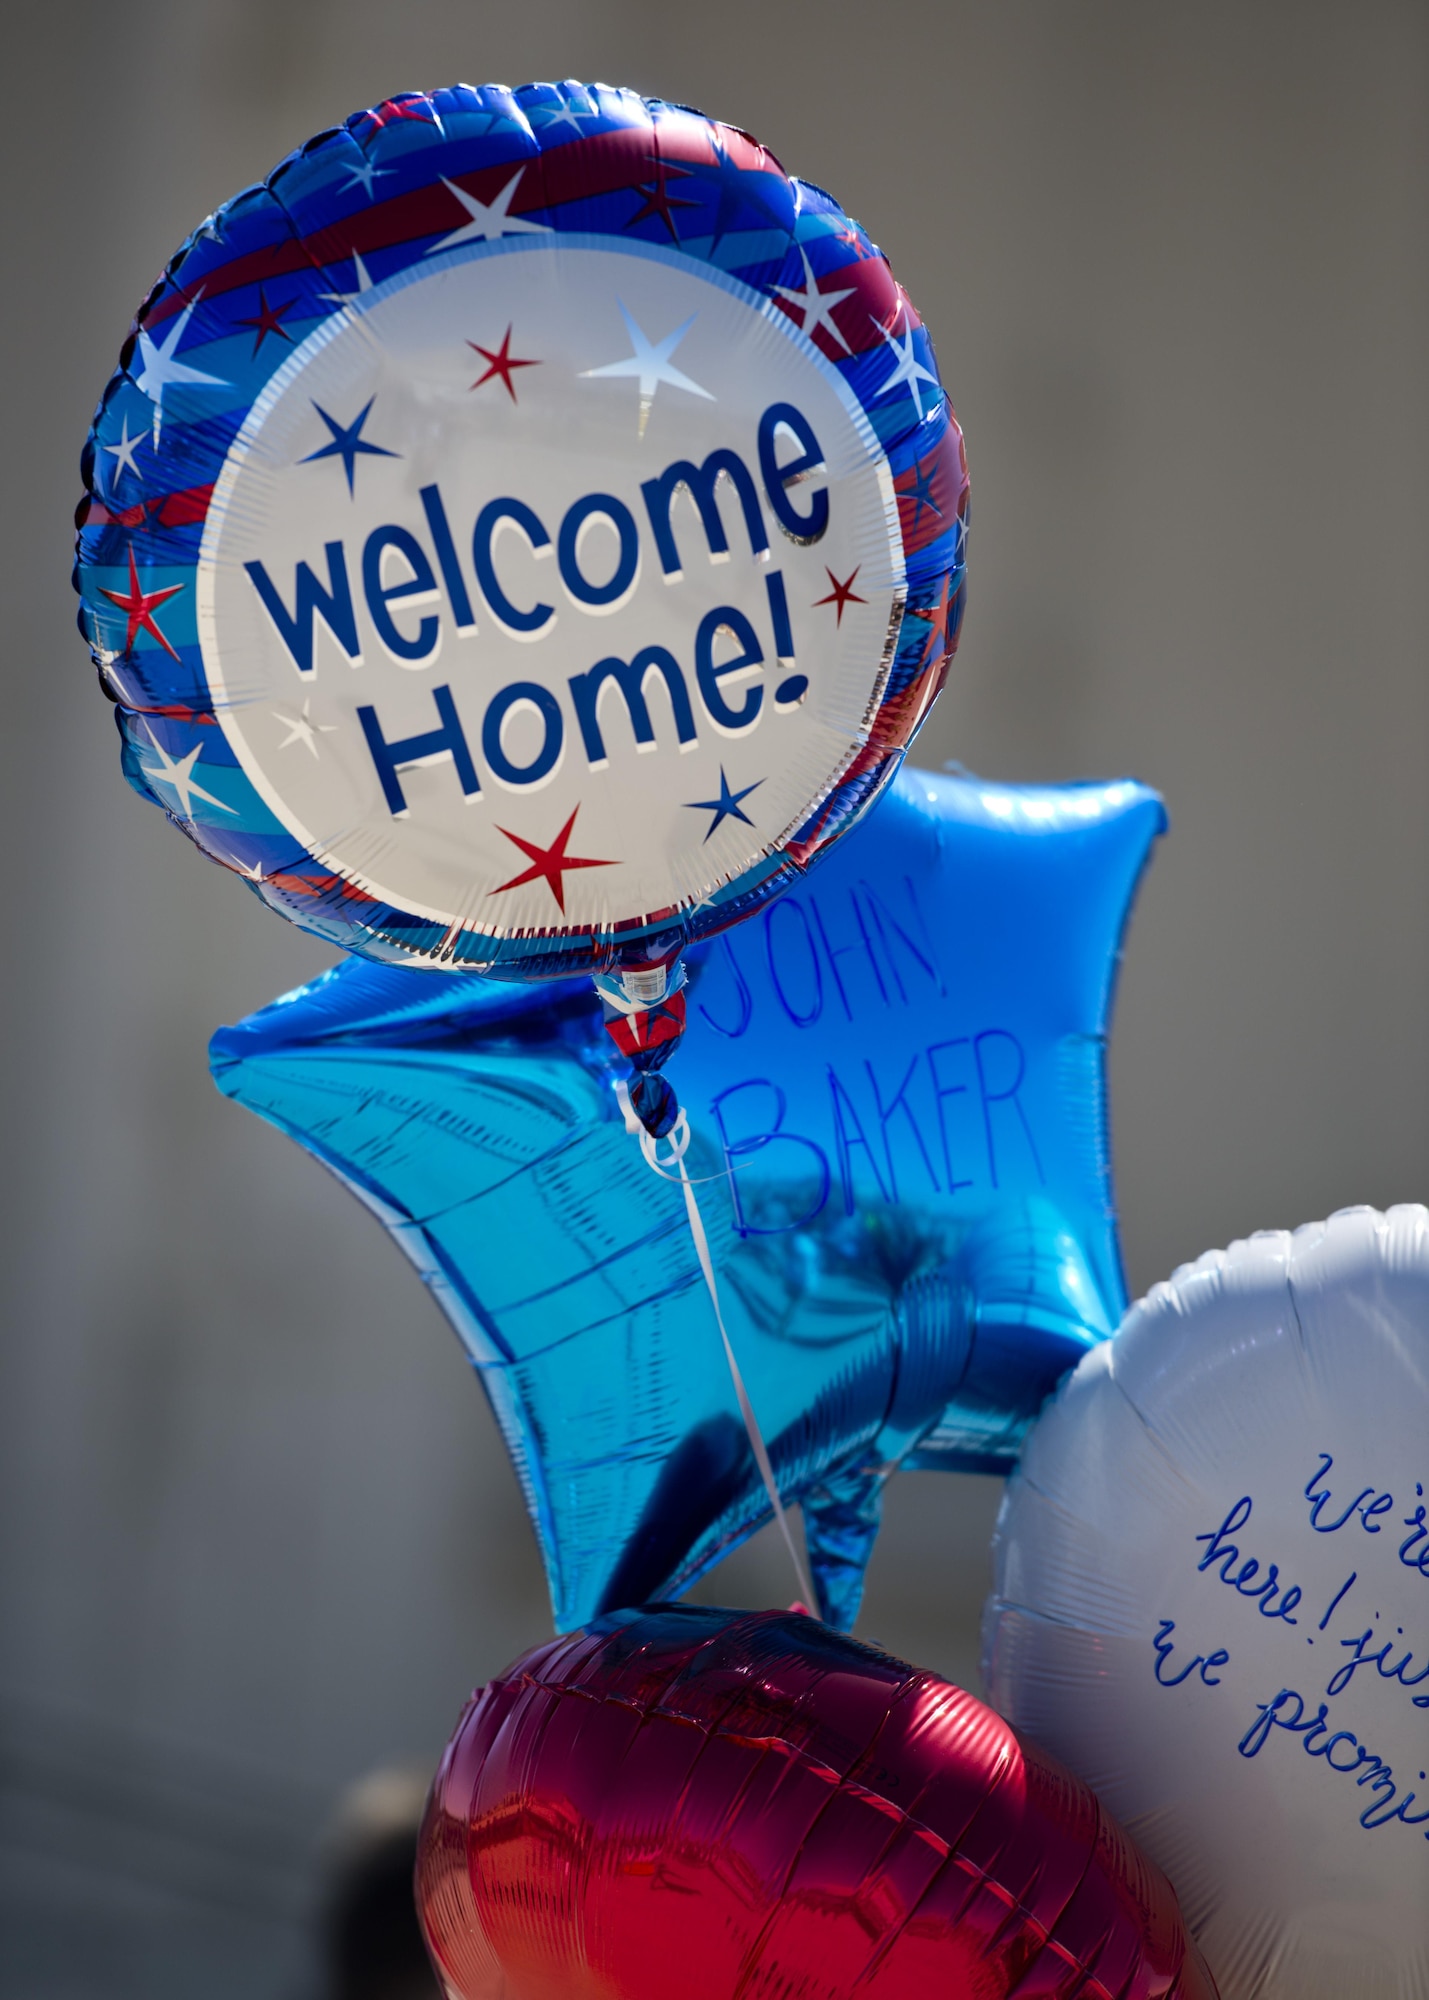 Balloons are held by family members of a deployed Airman at Minot Air Force Base, N.D., Aug. 29, 2016. Family members awaited the 69th Bomb Squadron’s return home after a six-month deployment to Andersen Air Force Base, Guam. (U.S. Air Force photo/Airman 1st Class J.T. Armstrong)